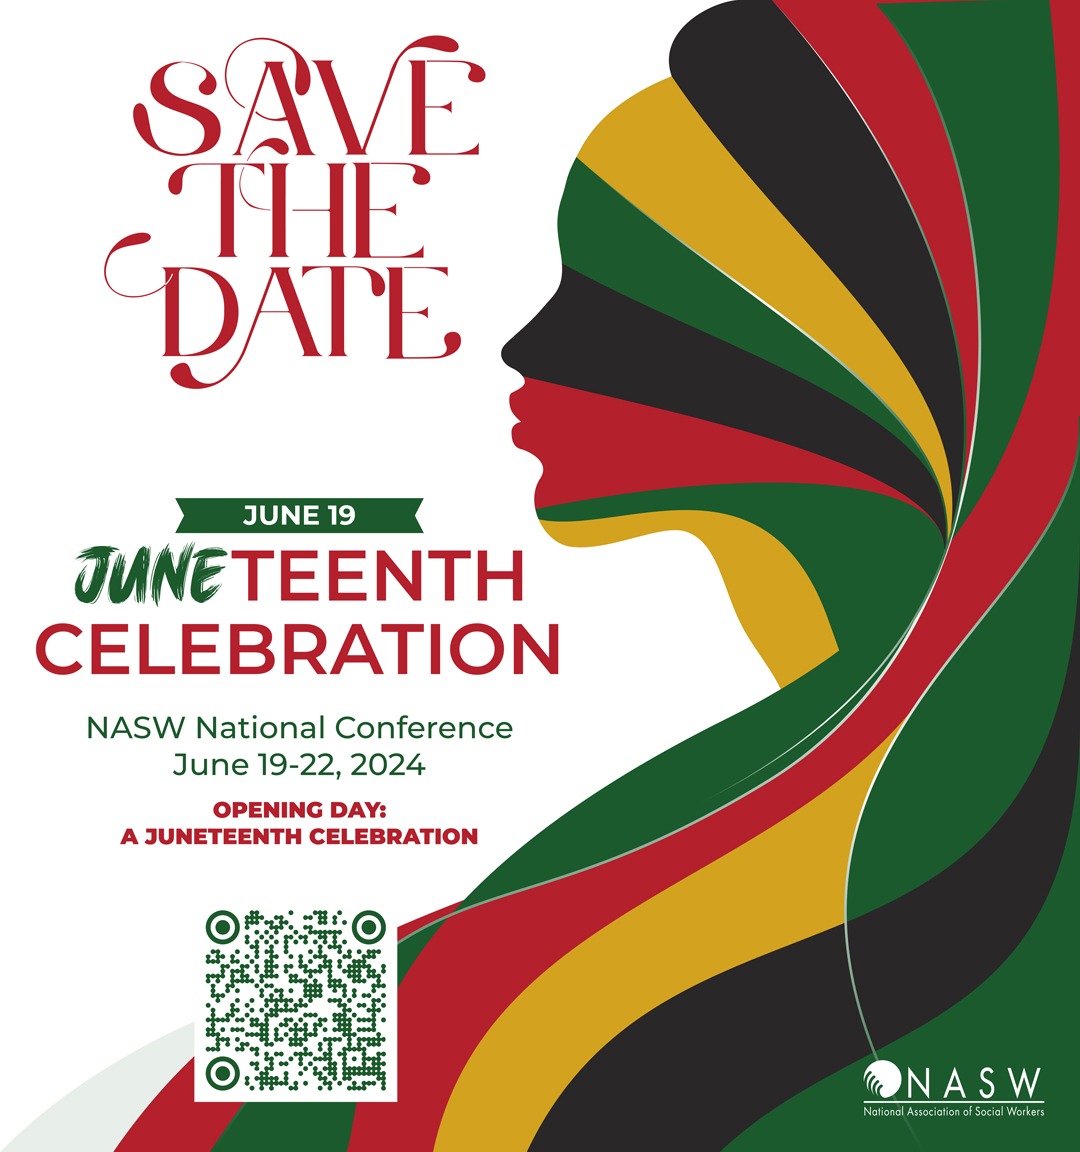 #ICYMI Join thousands of #SocialWorkers, like-minded professionals and social work leaders at #NASW2024, our National Conference June 19-22! This year’s conference opens on Juneteenth and we’re inviting you to join our opening celebration! Register today: buff.ly/3OUrbLZ